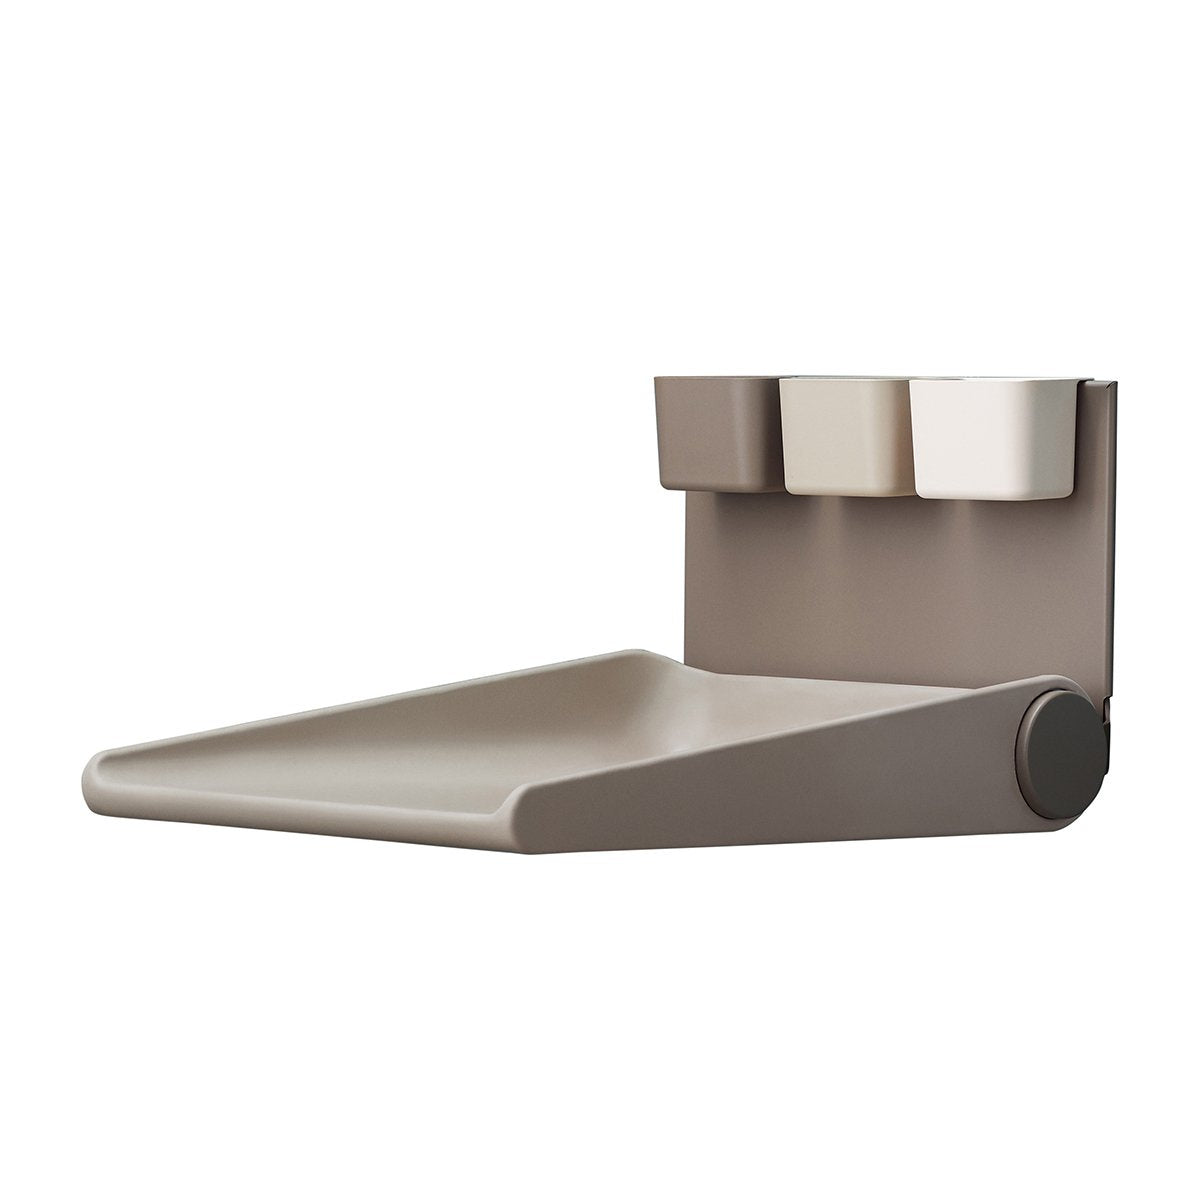 Leander Wally ™- changing table mounted on the wall, cappuccino